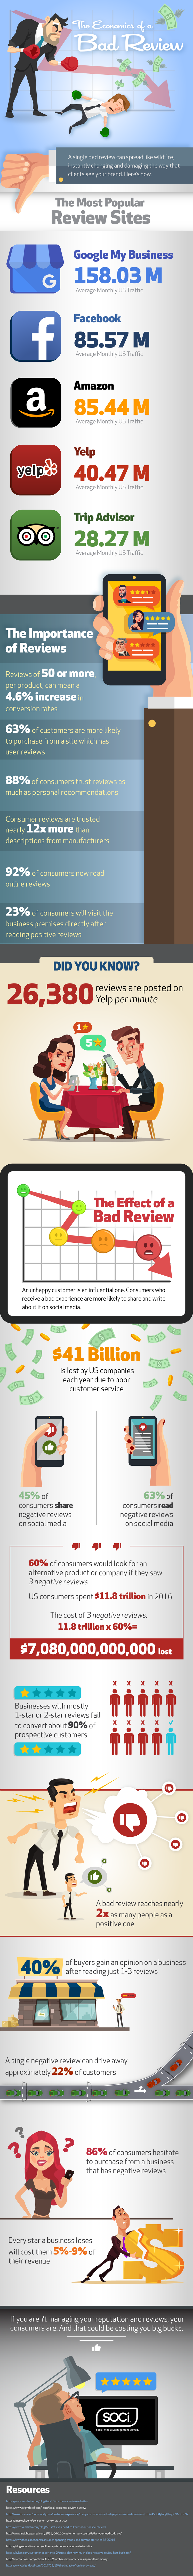 The Economics of a Bad Review [Infographic]